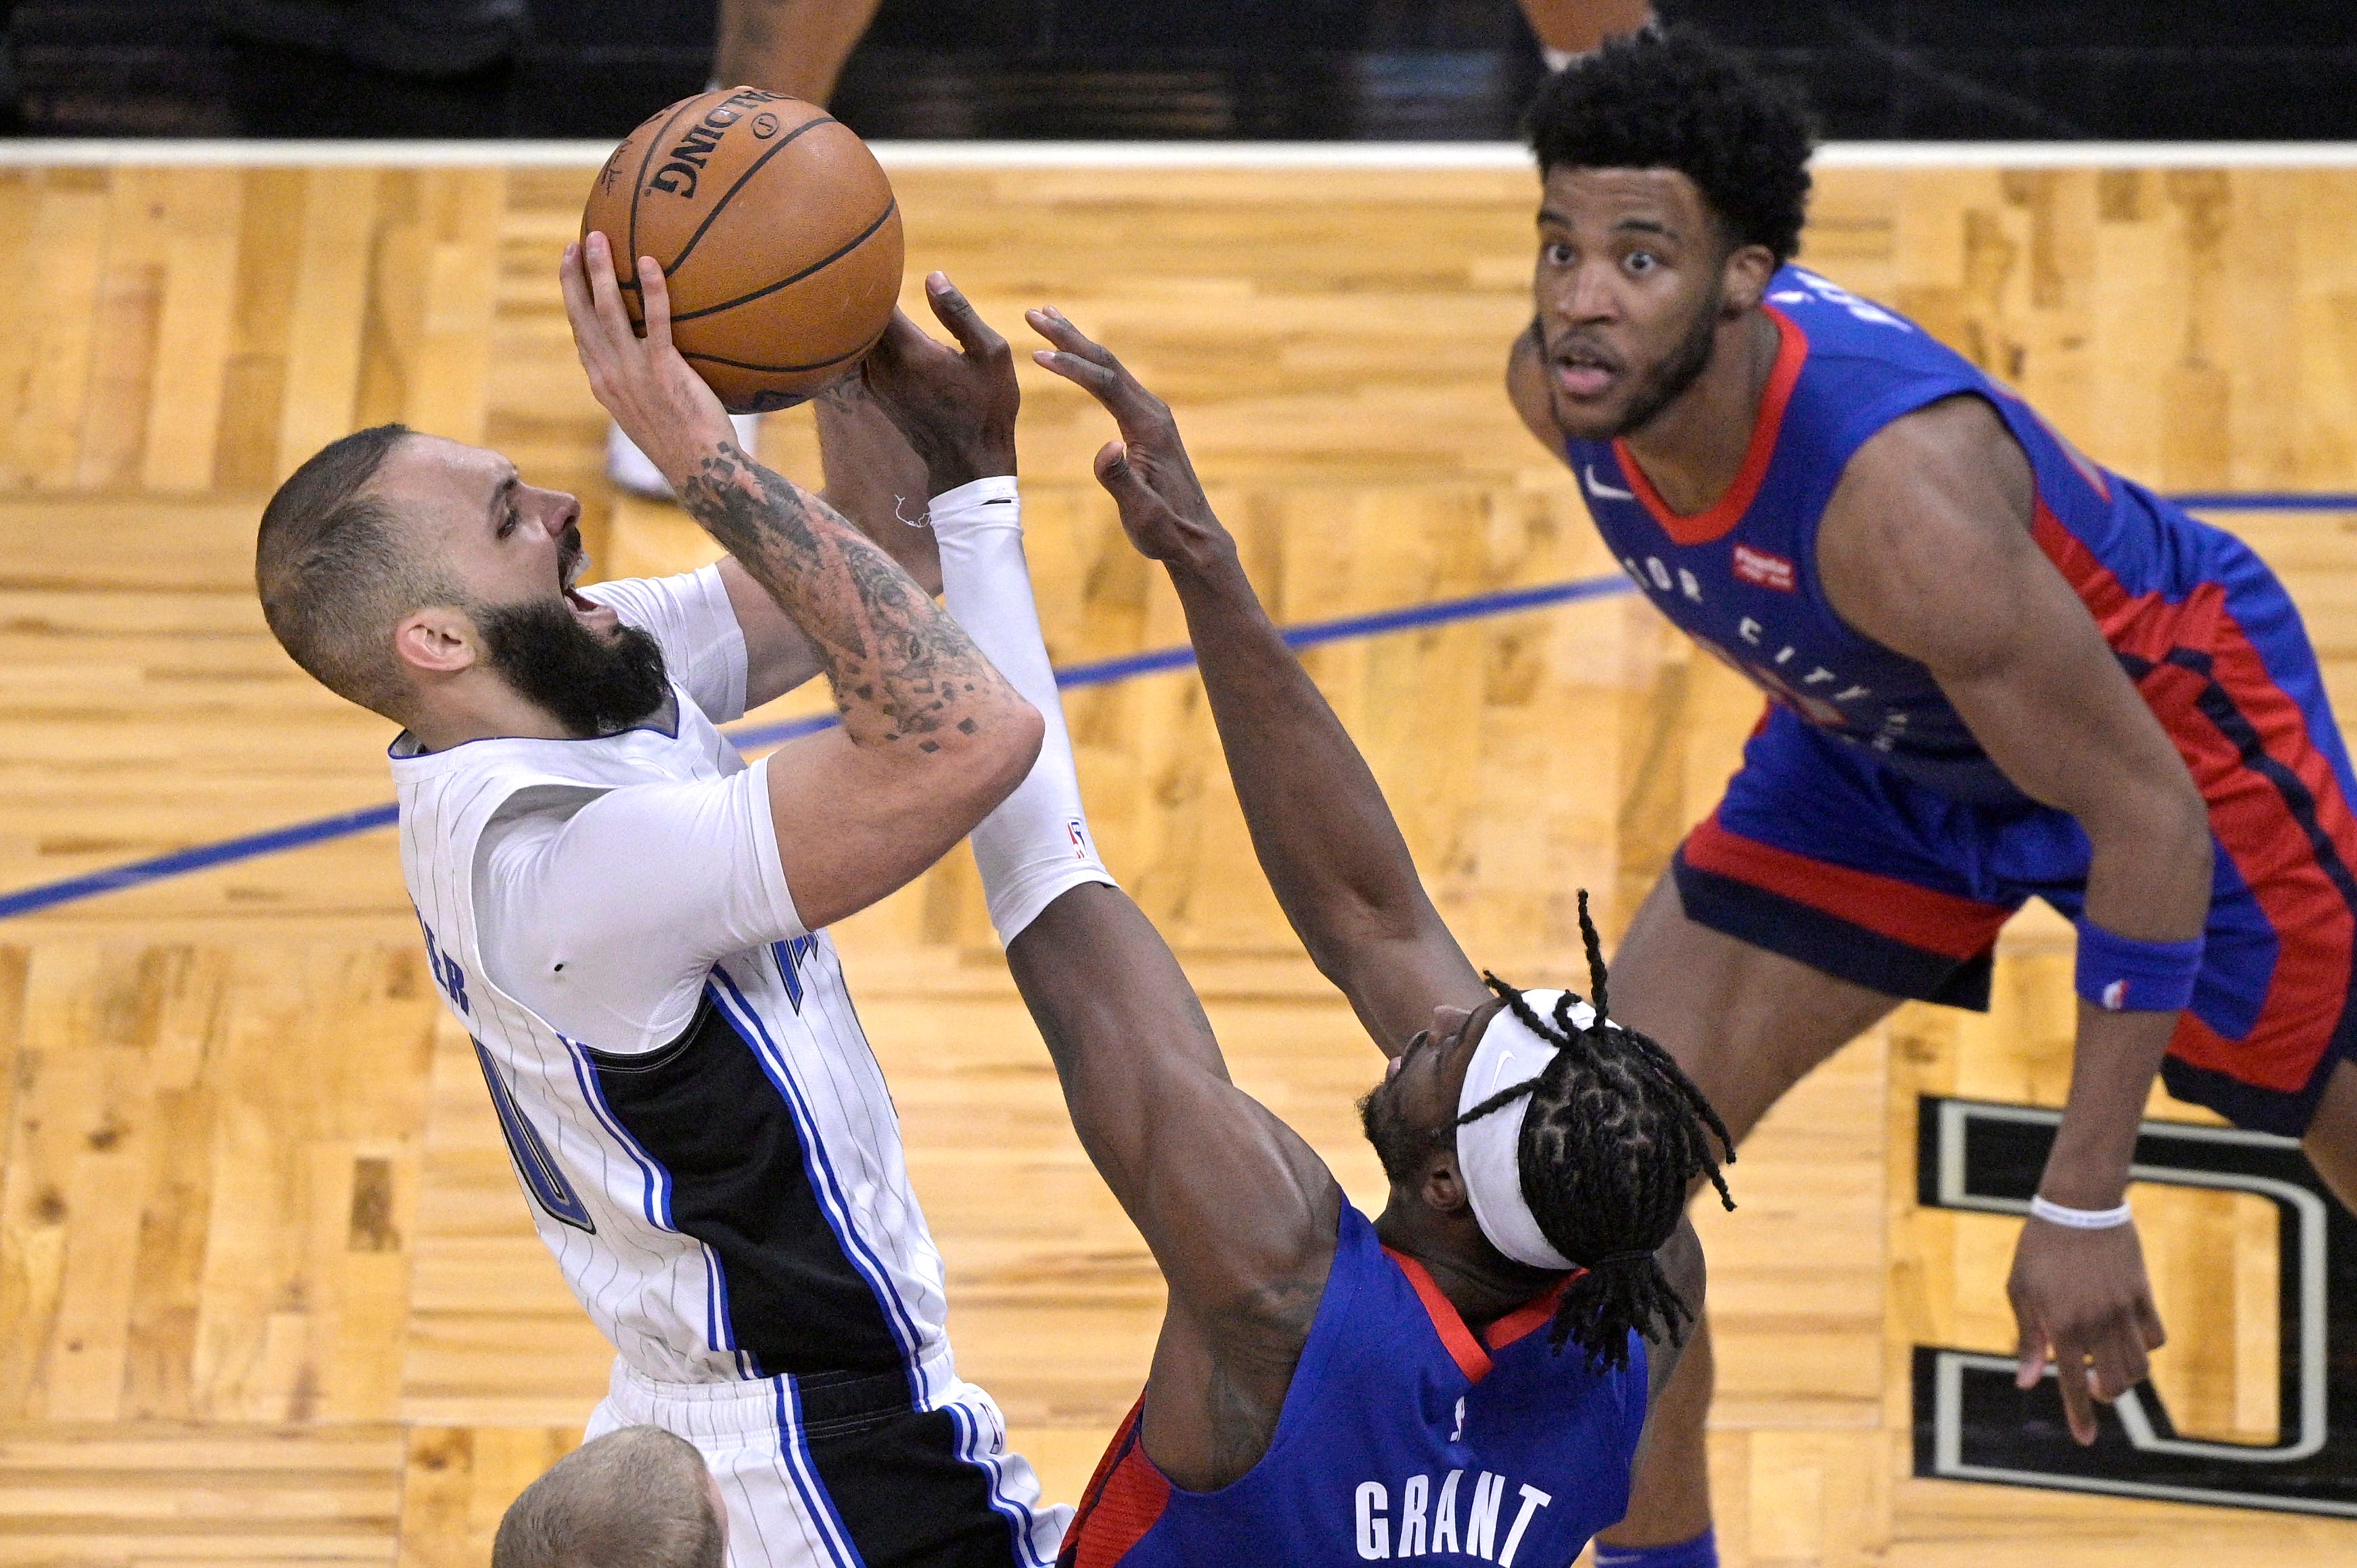 Orlando Magic guard Evan Fournier, left, is fouled by Detroit Pistons forward Jerami Grant, while going up for a shot, as forward Saddiq Bey, right, watches during the second half.